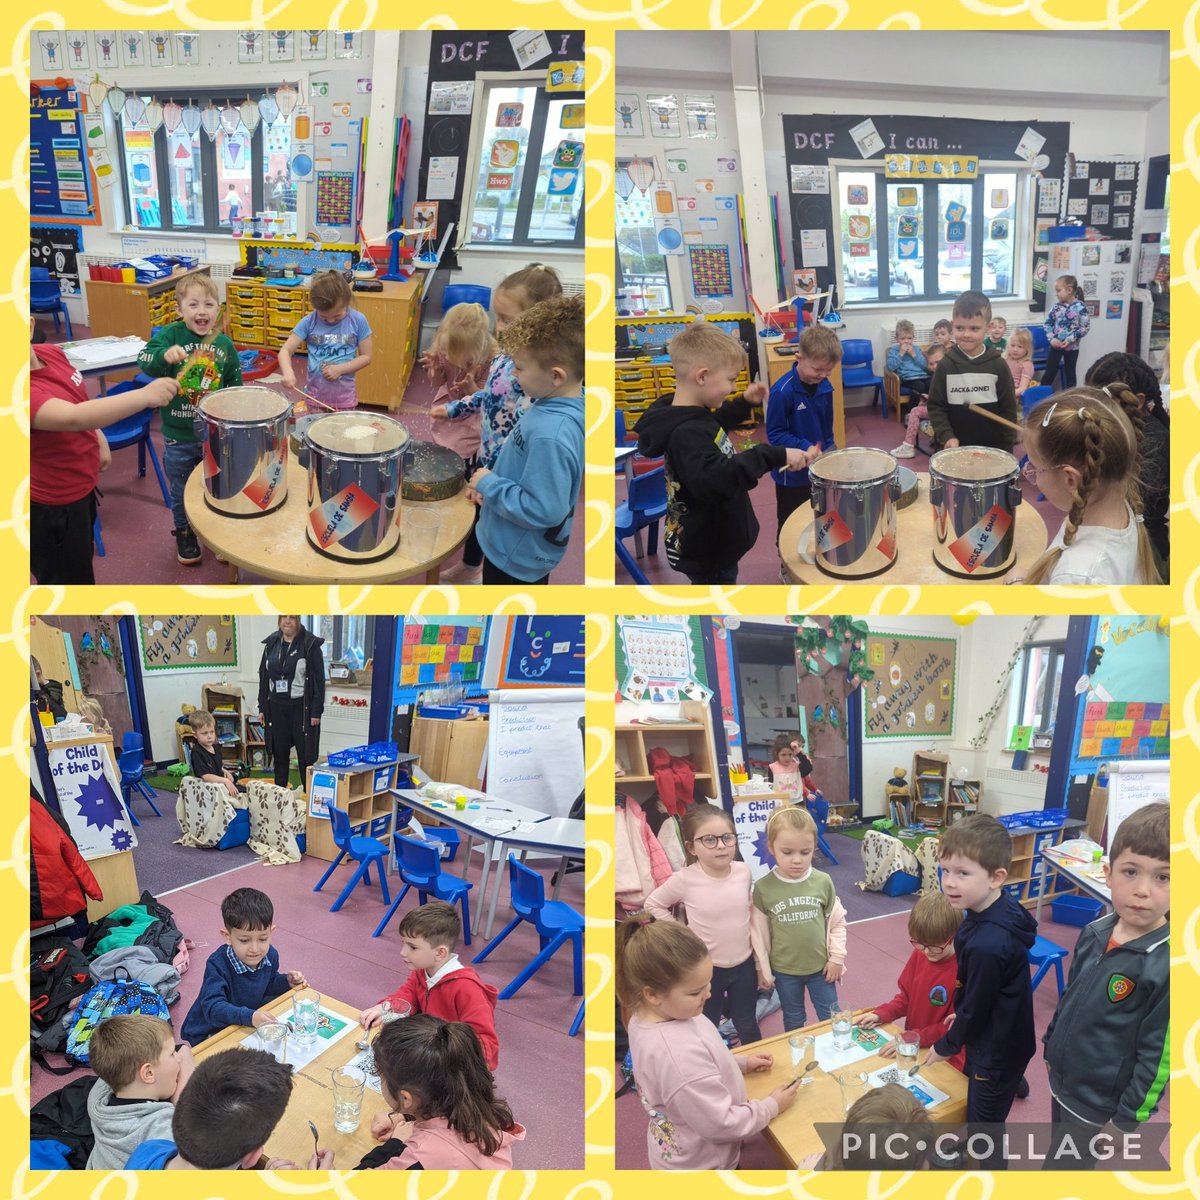 What amazing scientists we have in year one! We spent the morning exploring how sound is made and making predictions! Looking forward to writing up our conclusions tomorrow! @HeadPdcs #STEM